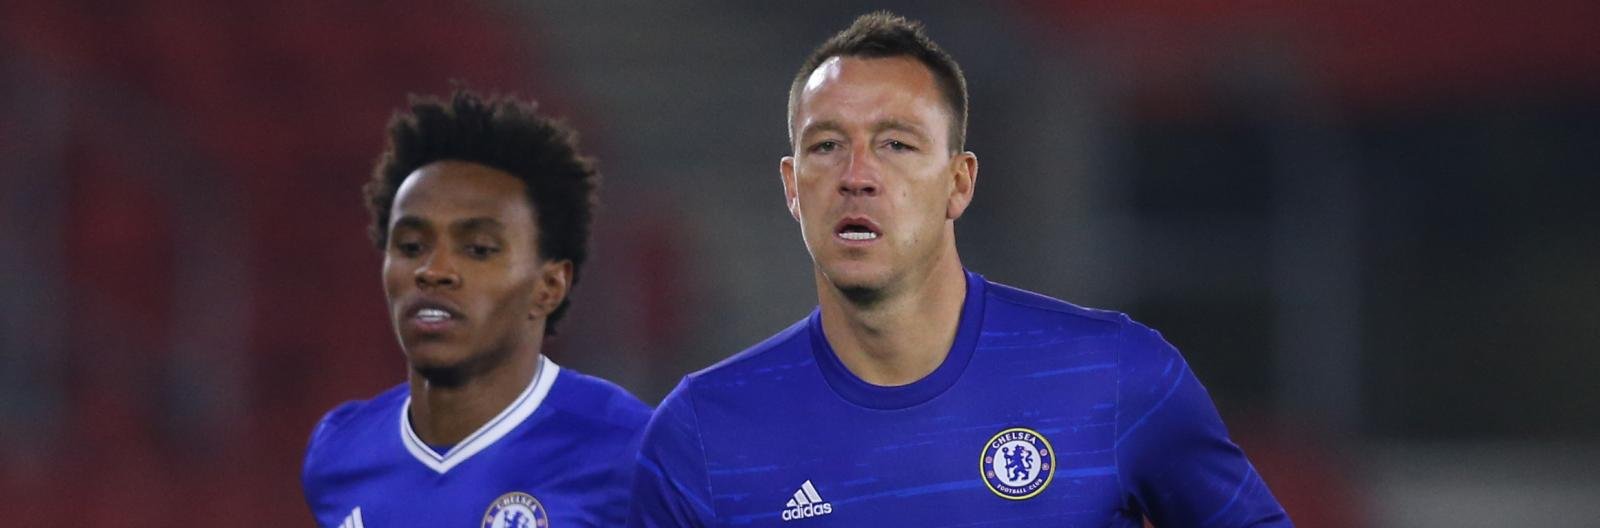 Chelsea legend set to be offered mega £8m-a-year deal in China